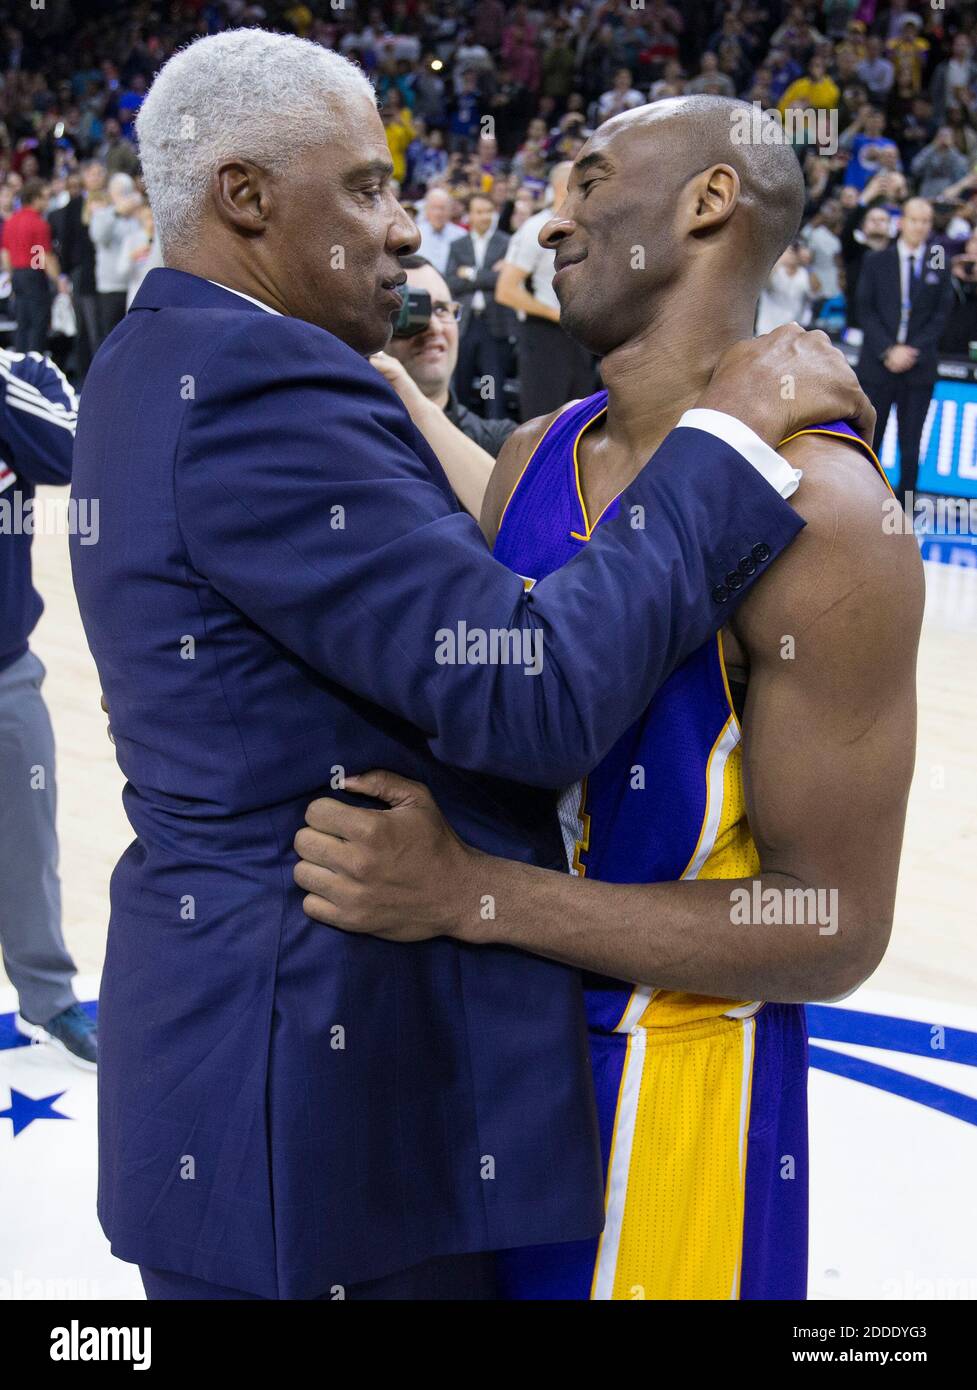 NO FILM, NO VIDEO, NO TV, NO DOCUMENTARY - Julius Erving, left, greets the Los Angeles Lakers' Kobe Bryant at center court before action against the Philadelphia 76ers at the Wells Fargo Center in Philadelphia, PA, USA on Tuesday, December 1, 2015. Photo by Charles Fox/Philadelphia Inquirer/TNS/ABACAPRESS.COM Stock Photo